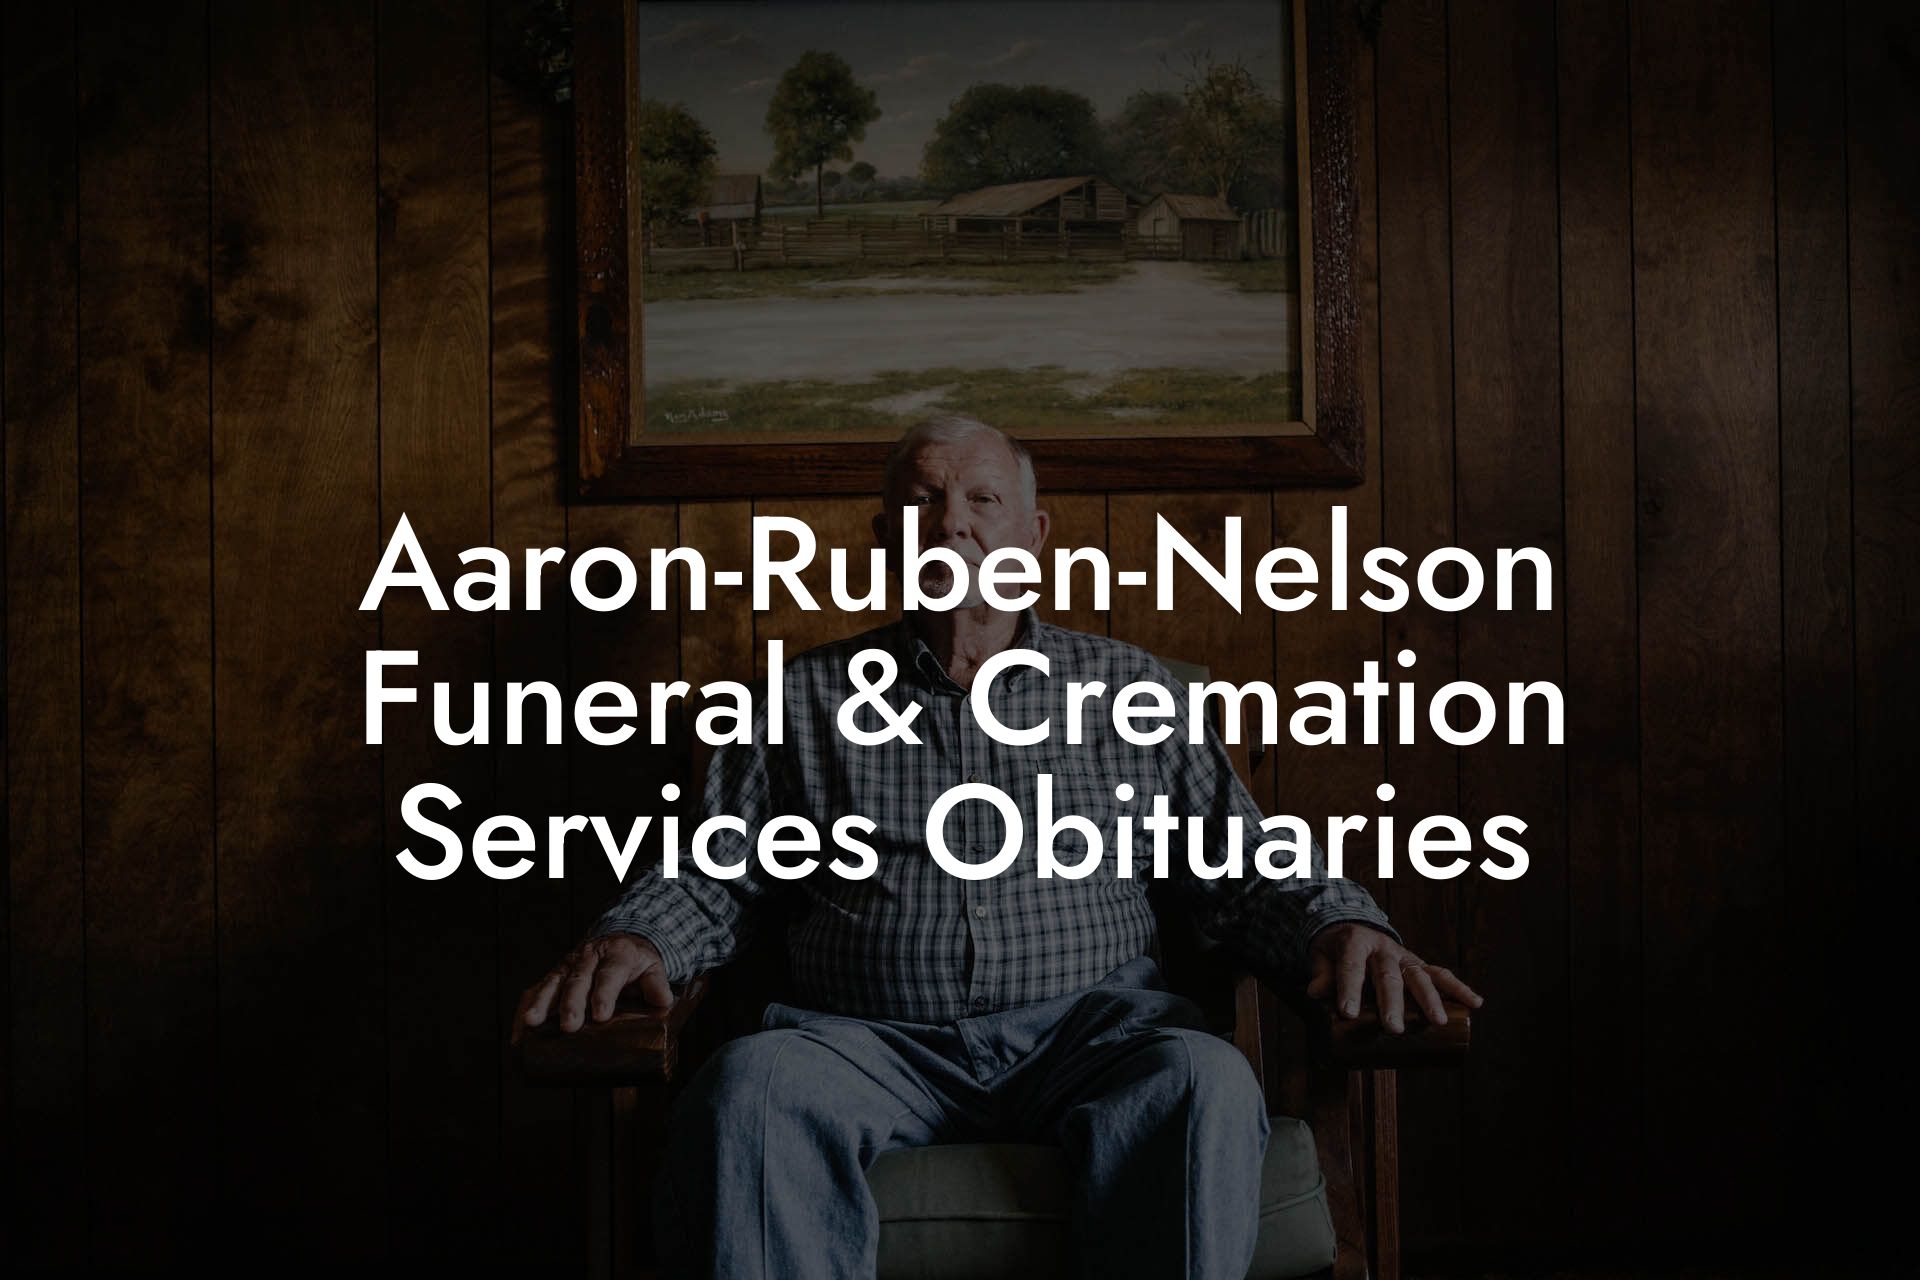 Aaron-Ruben-Nelson Funeral & Cremation Services Obituaries